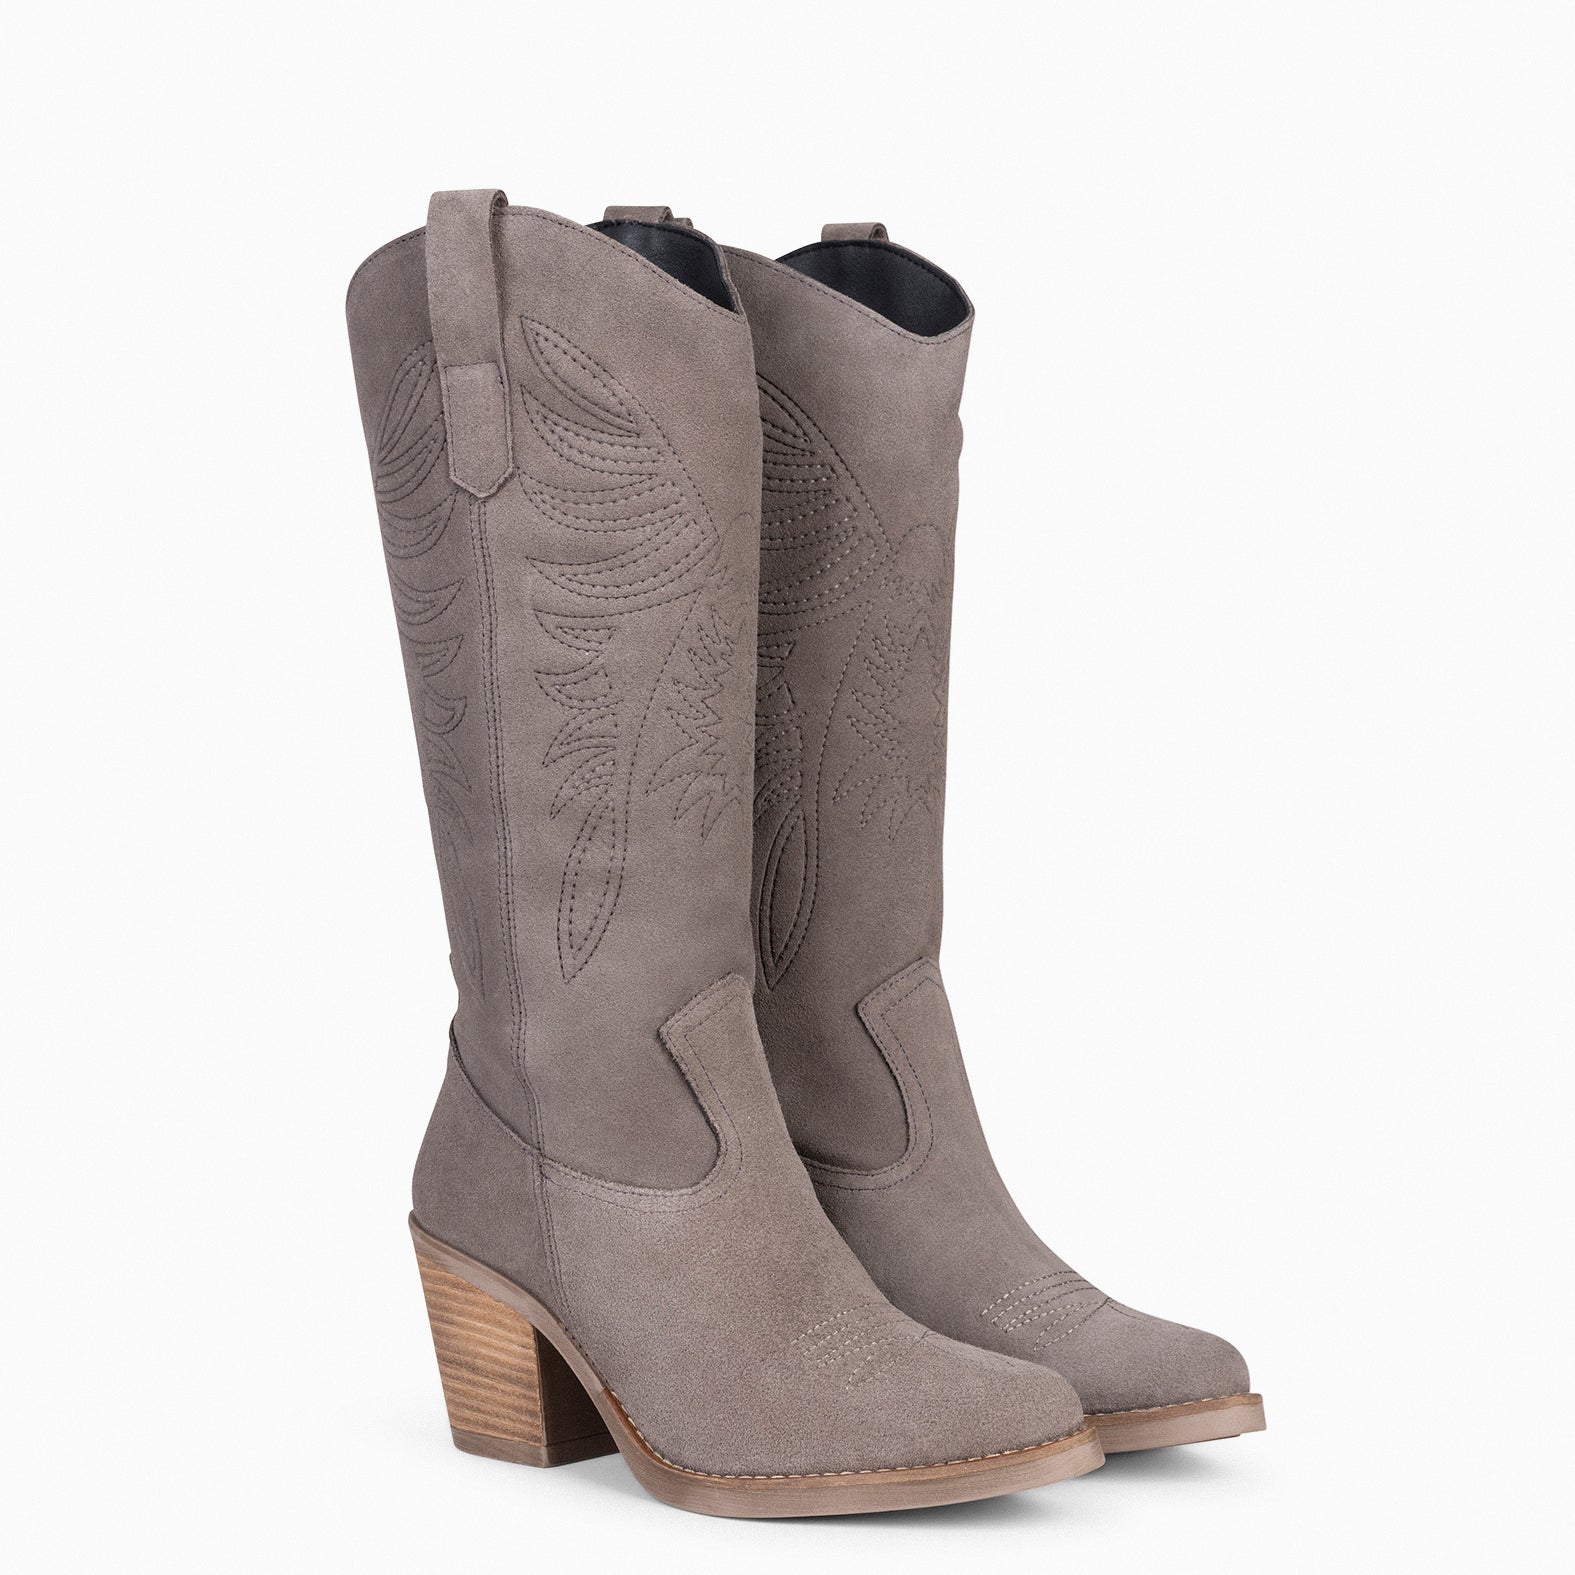 DALLAS - TAUPE High Cowboy Boots 